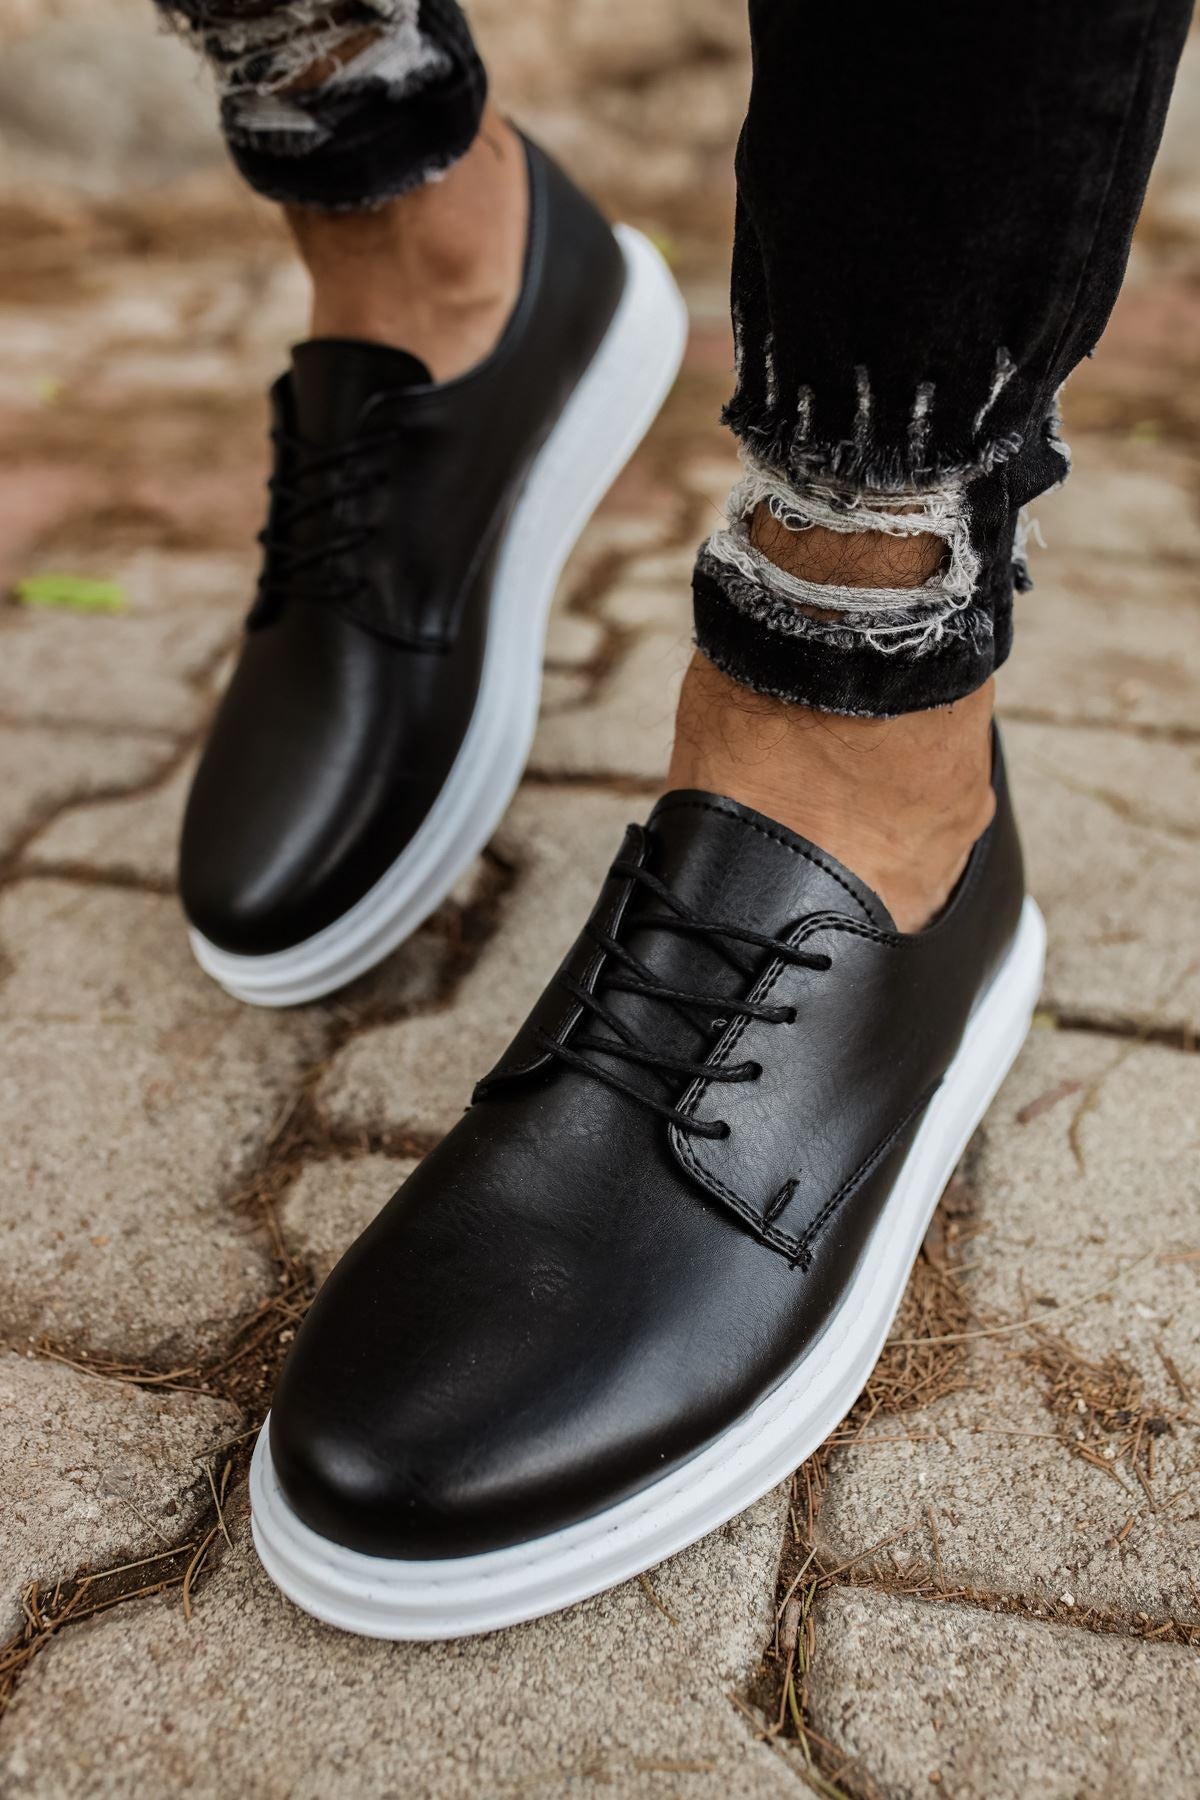 CH003 Men's Black-White Sole Matte Leather Casual Classic Sneaker Shoes - STREETMODE ™